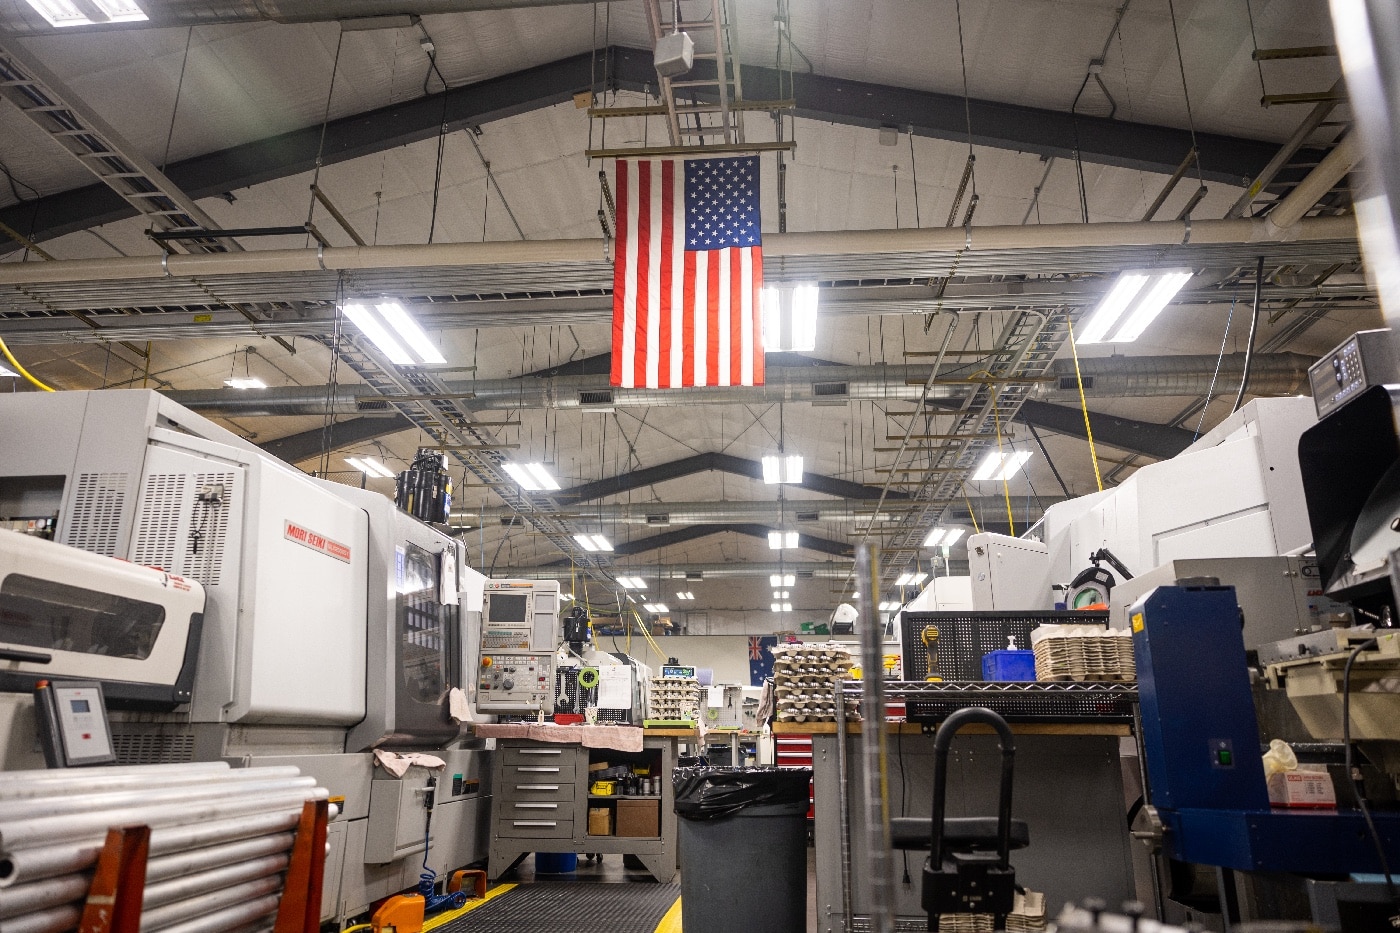 In this digital image, we see CNC machines, metal working tools and a United States of America flag. 